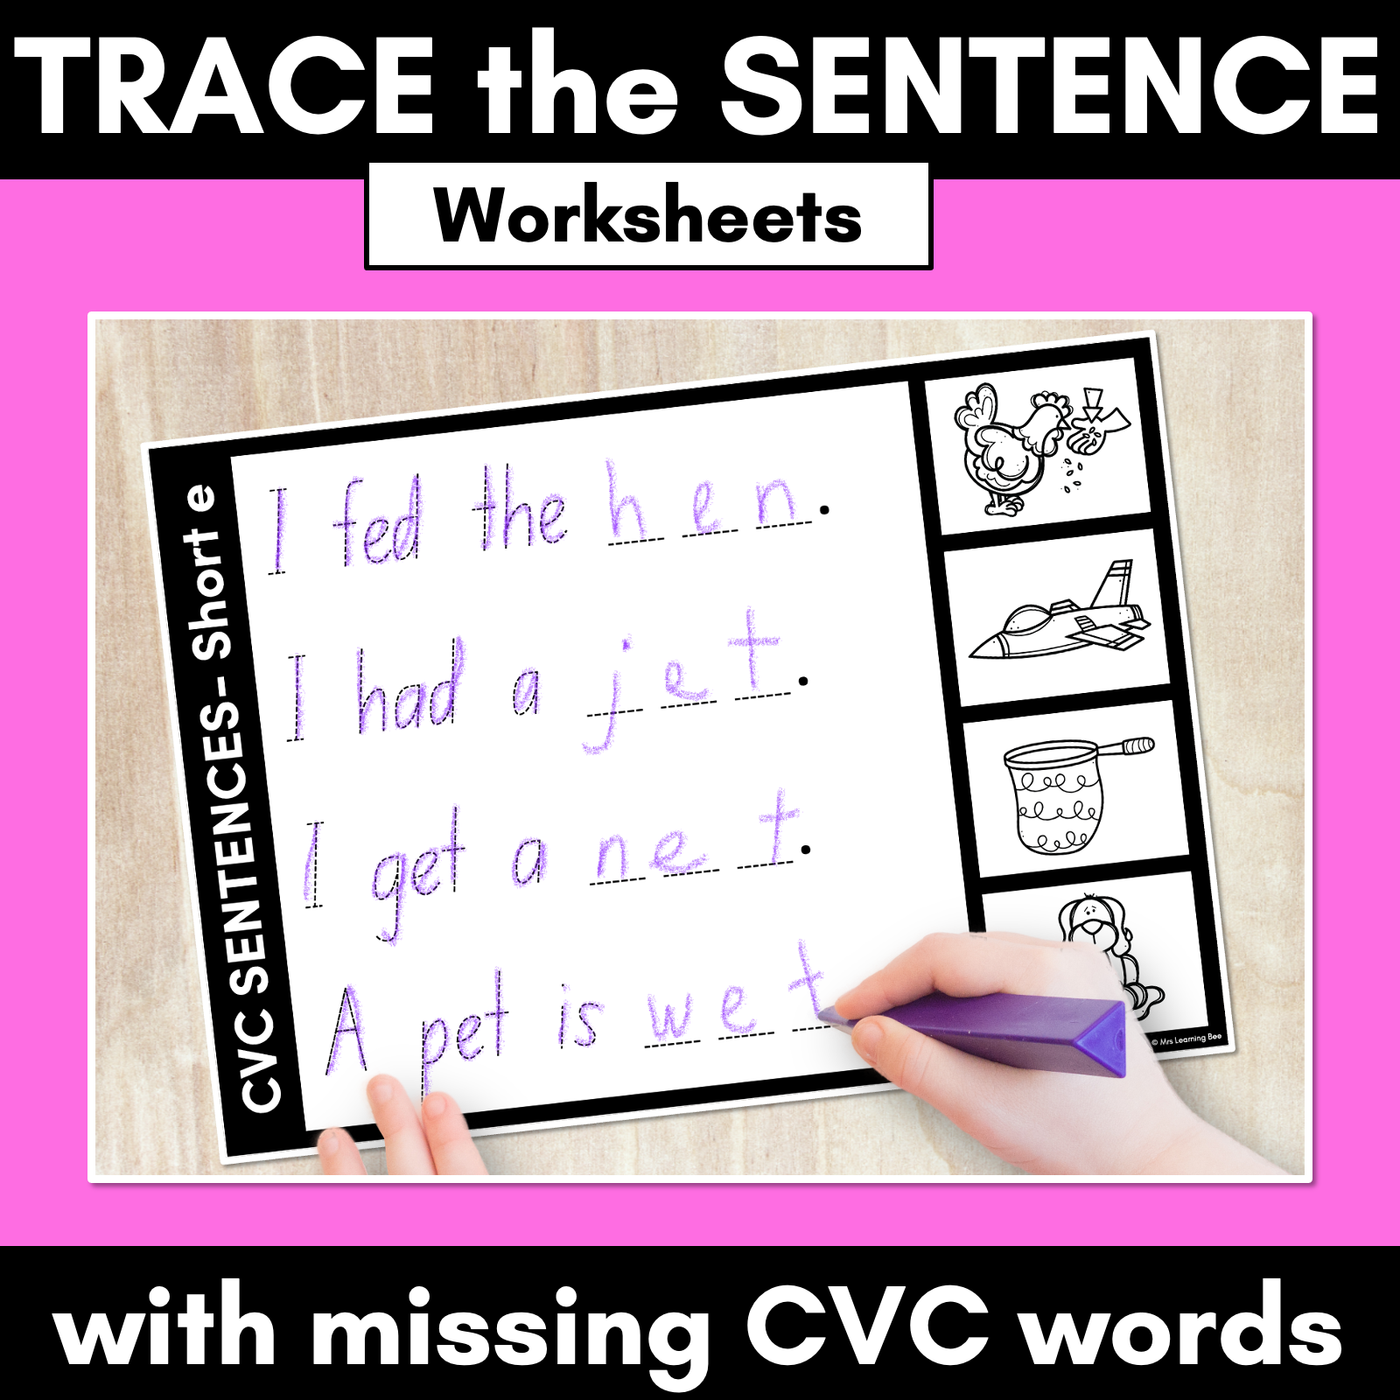 CVC WORD SENTENCES WORKSHEETS - Trace the Sentence with missing CVC words